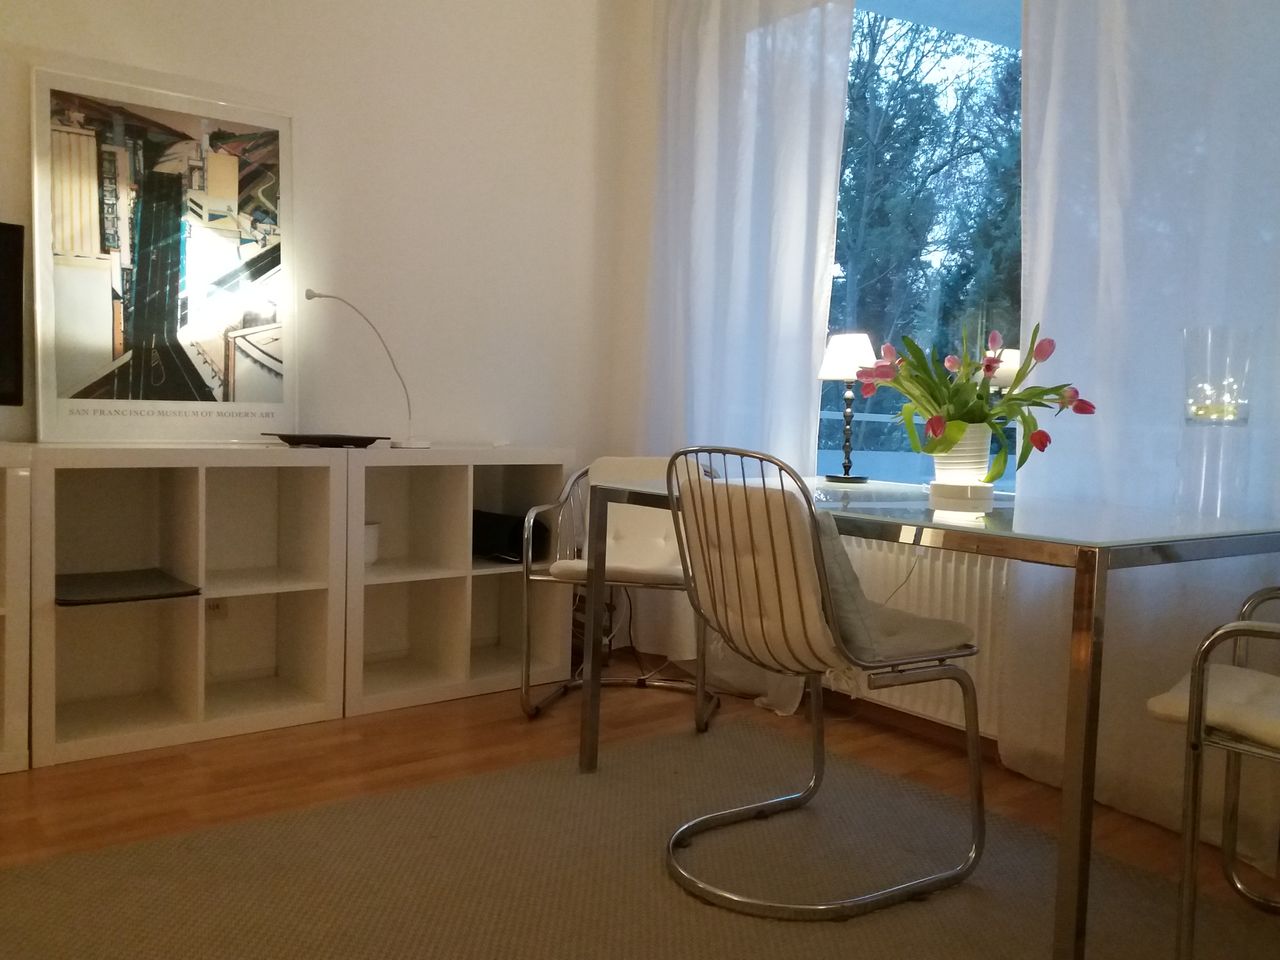 Modern and sunny appartement in a beautiful surrounding in Dahlem /Schmargendorf near Grunewald, FU Berlin  and next to Roseneck